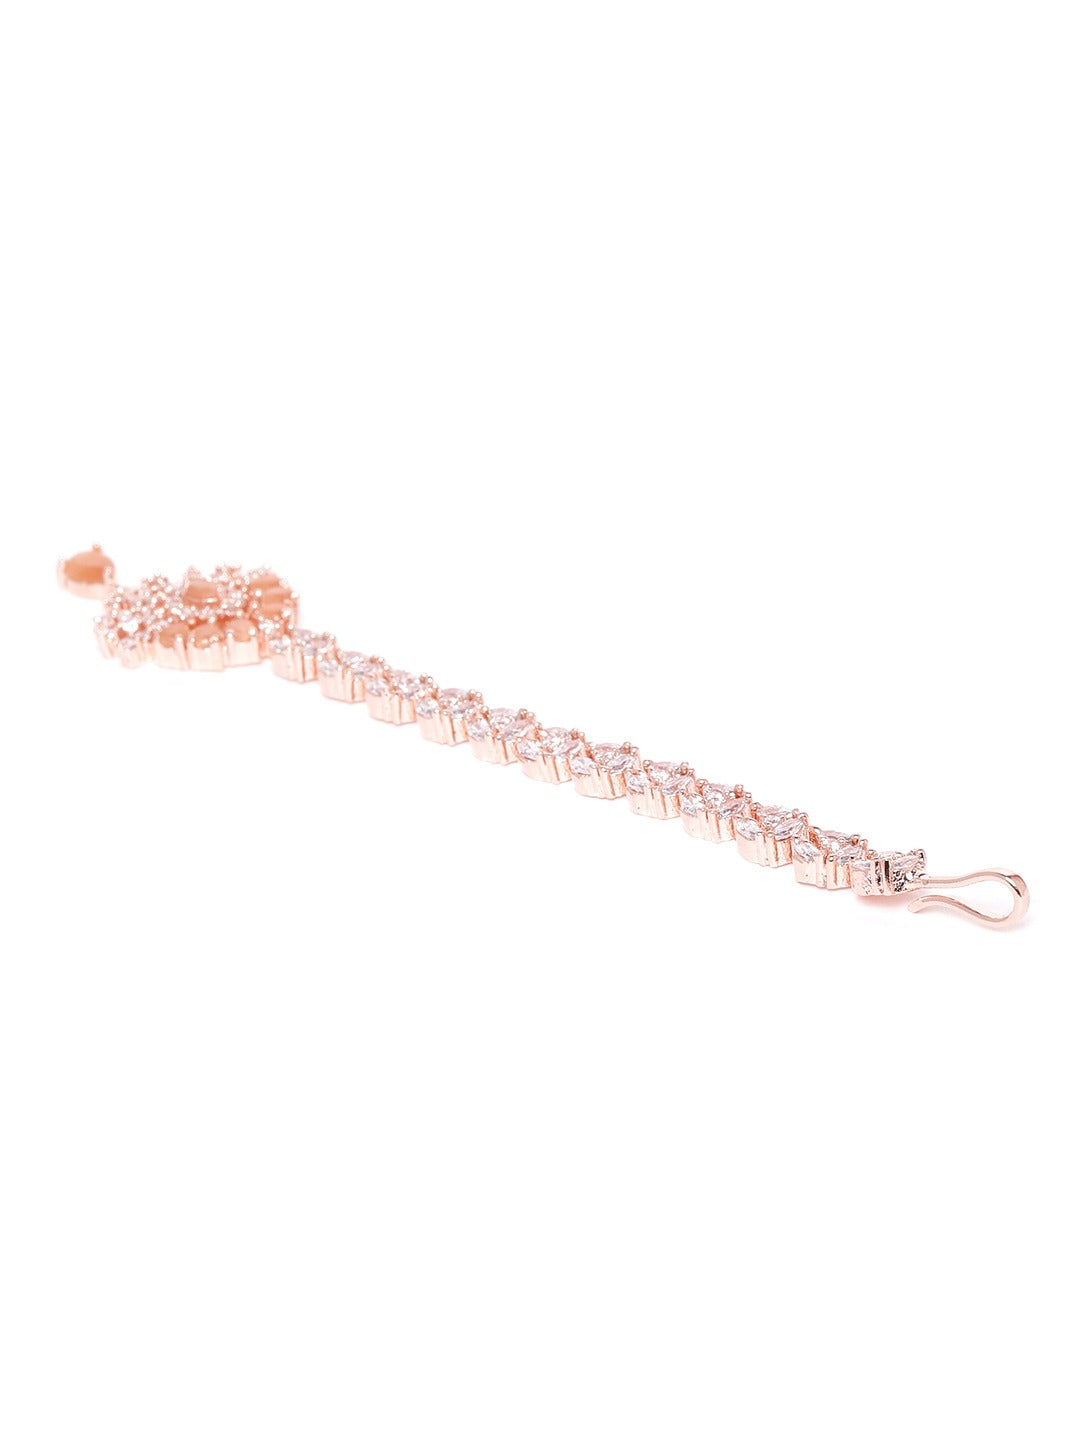 Peach-Coloured Rose Gold-Plated CZ Stone-Studded Handcrafted Maang Tika